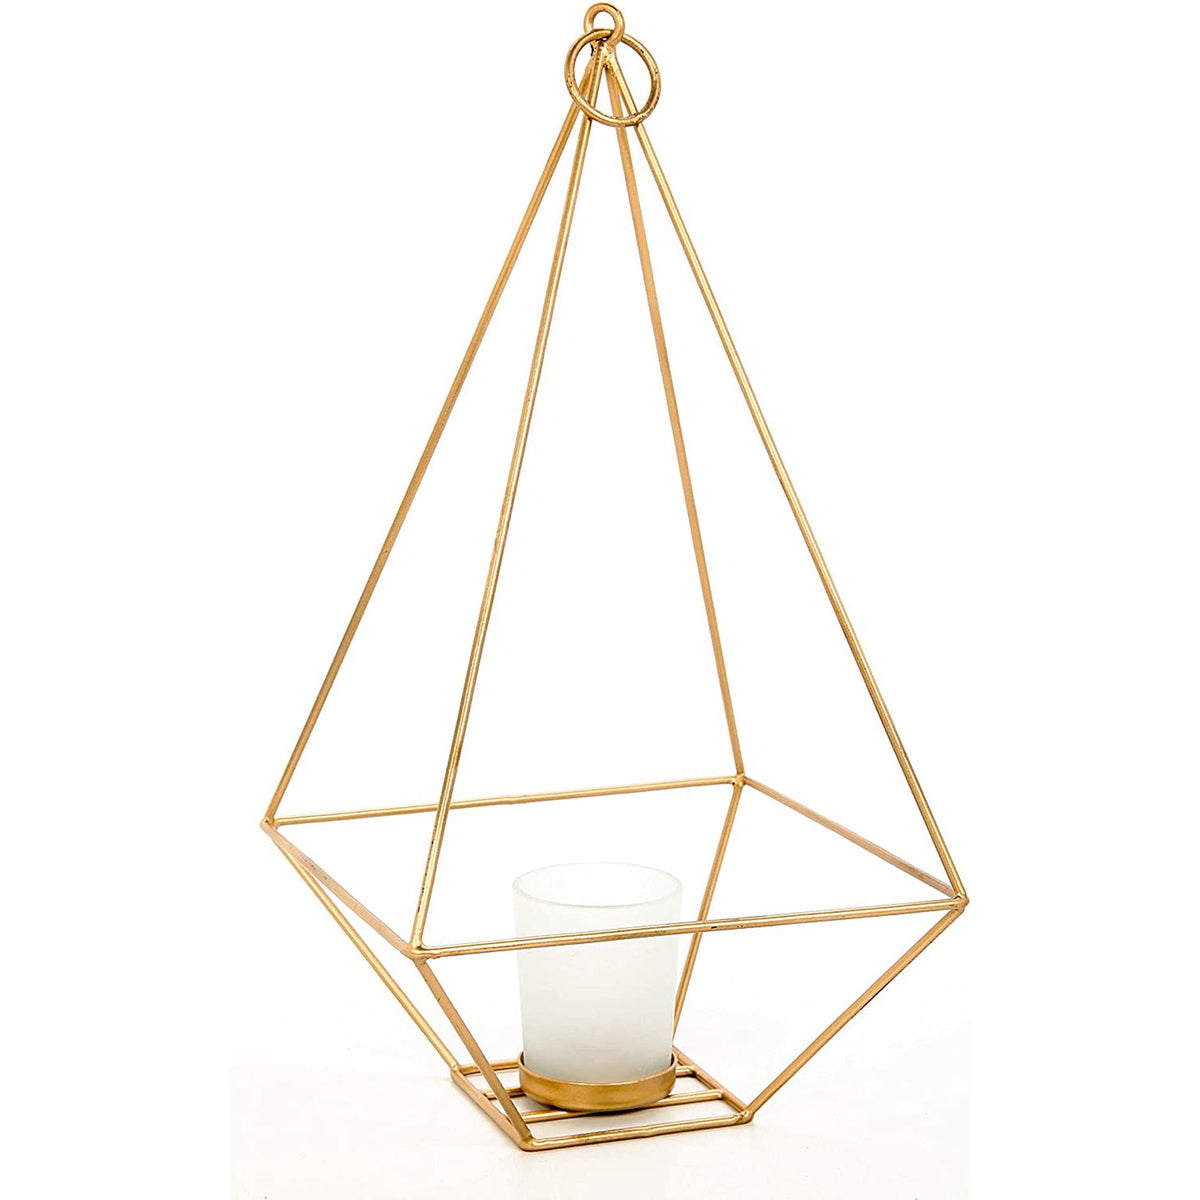 HOSLEY®  Iron Hanging Lantern with Frosted Glass Candle Holder, Gold Finish,  Set of 2, 11.5 inches High each